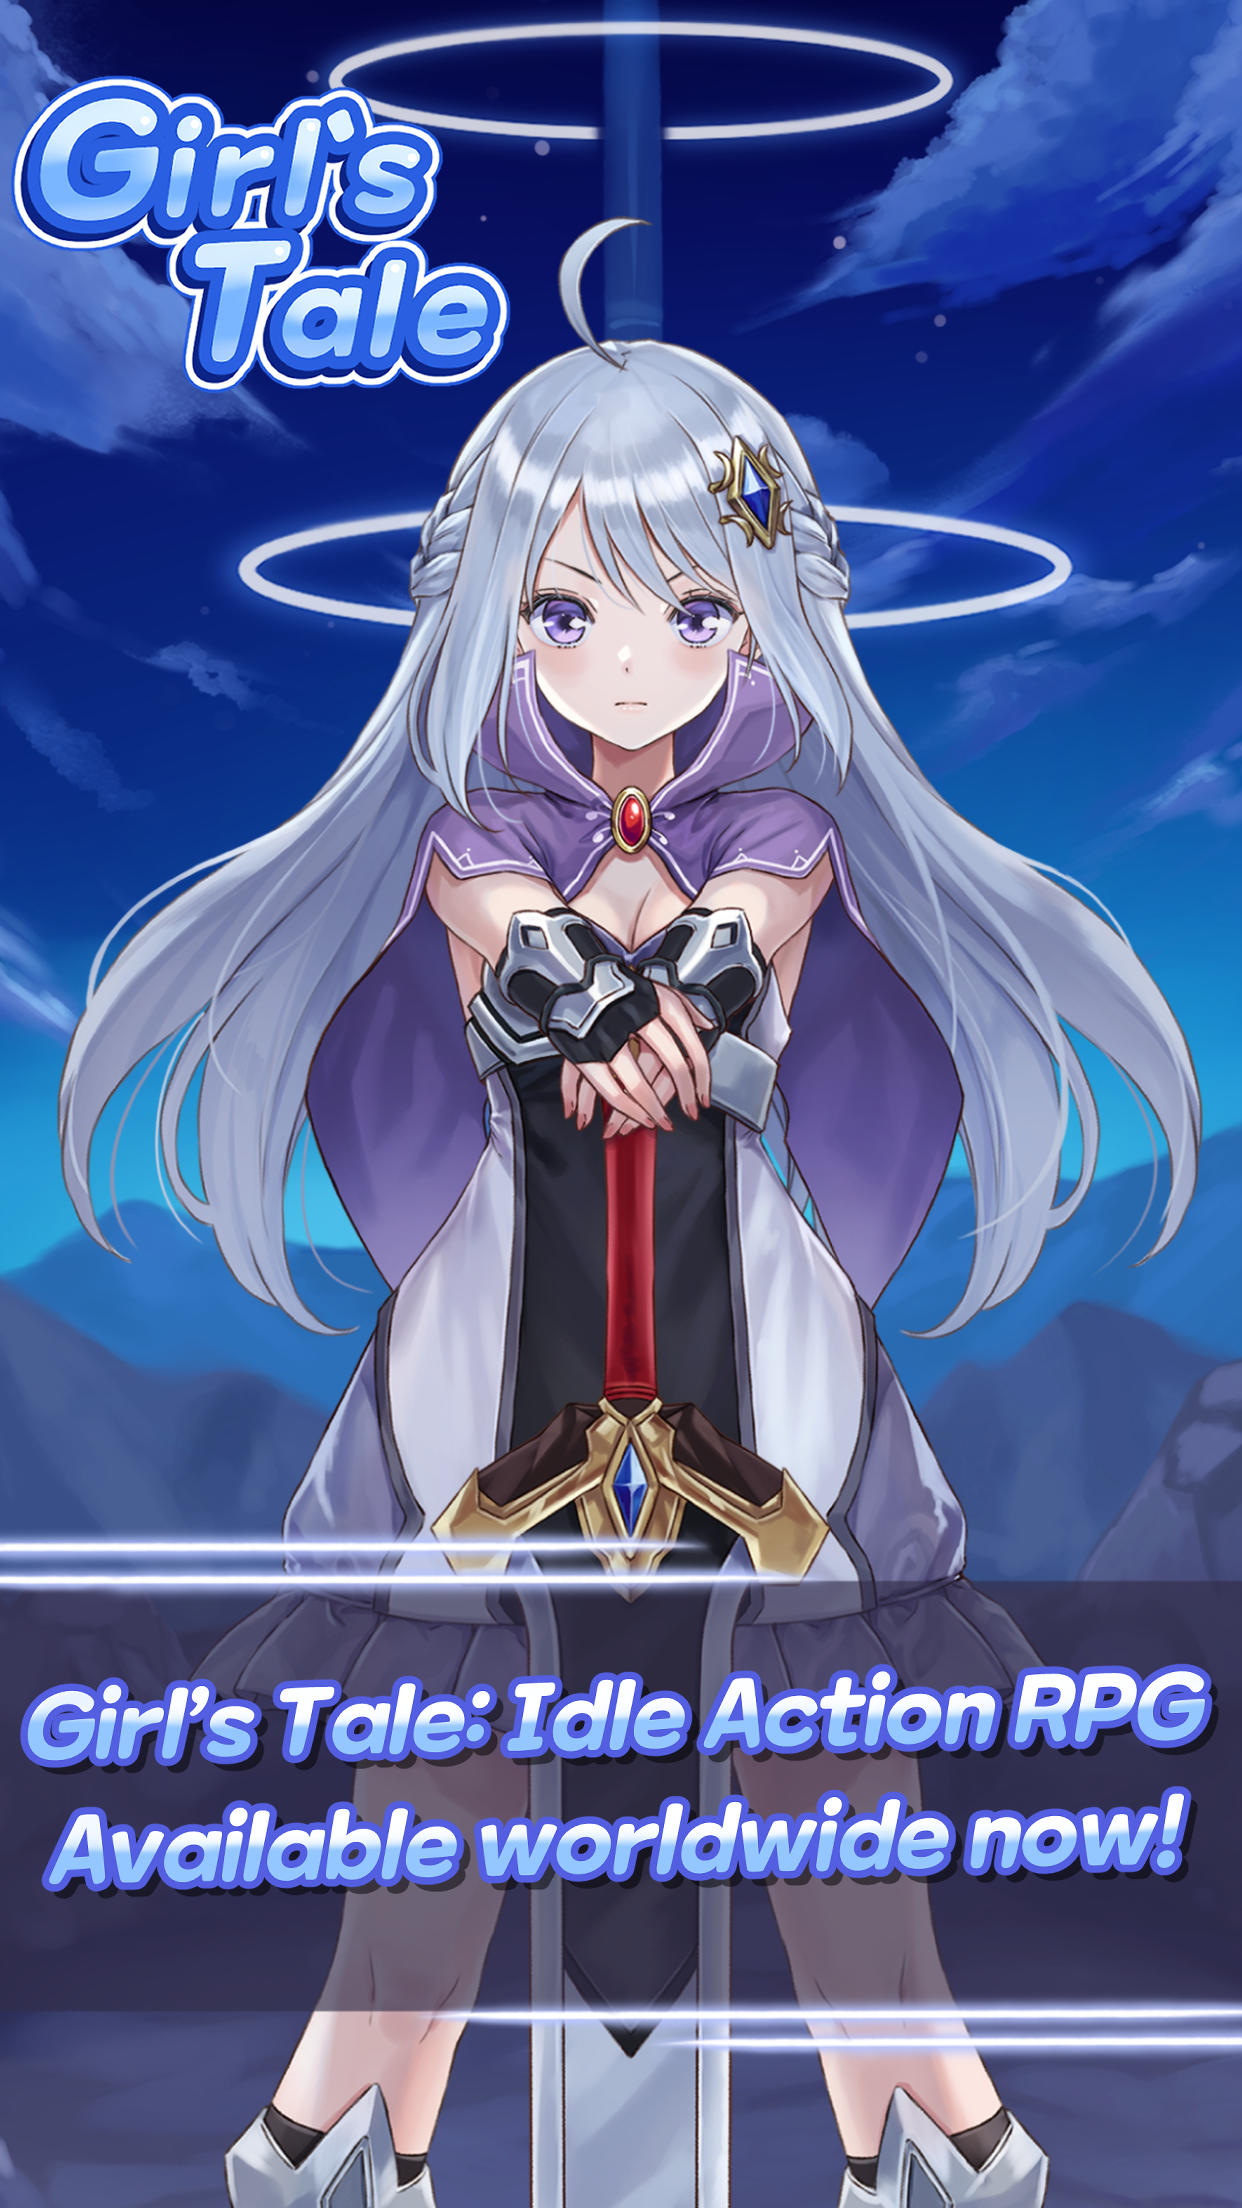 Screenshot 1 of Girls Tale: Idle Action RPG 5.2.2